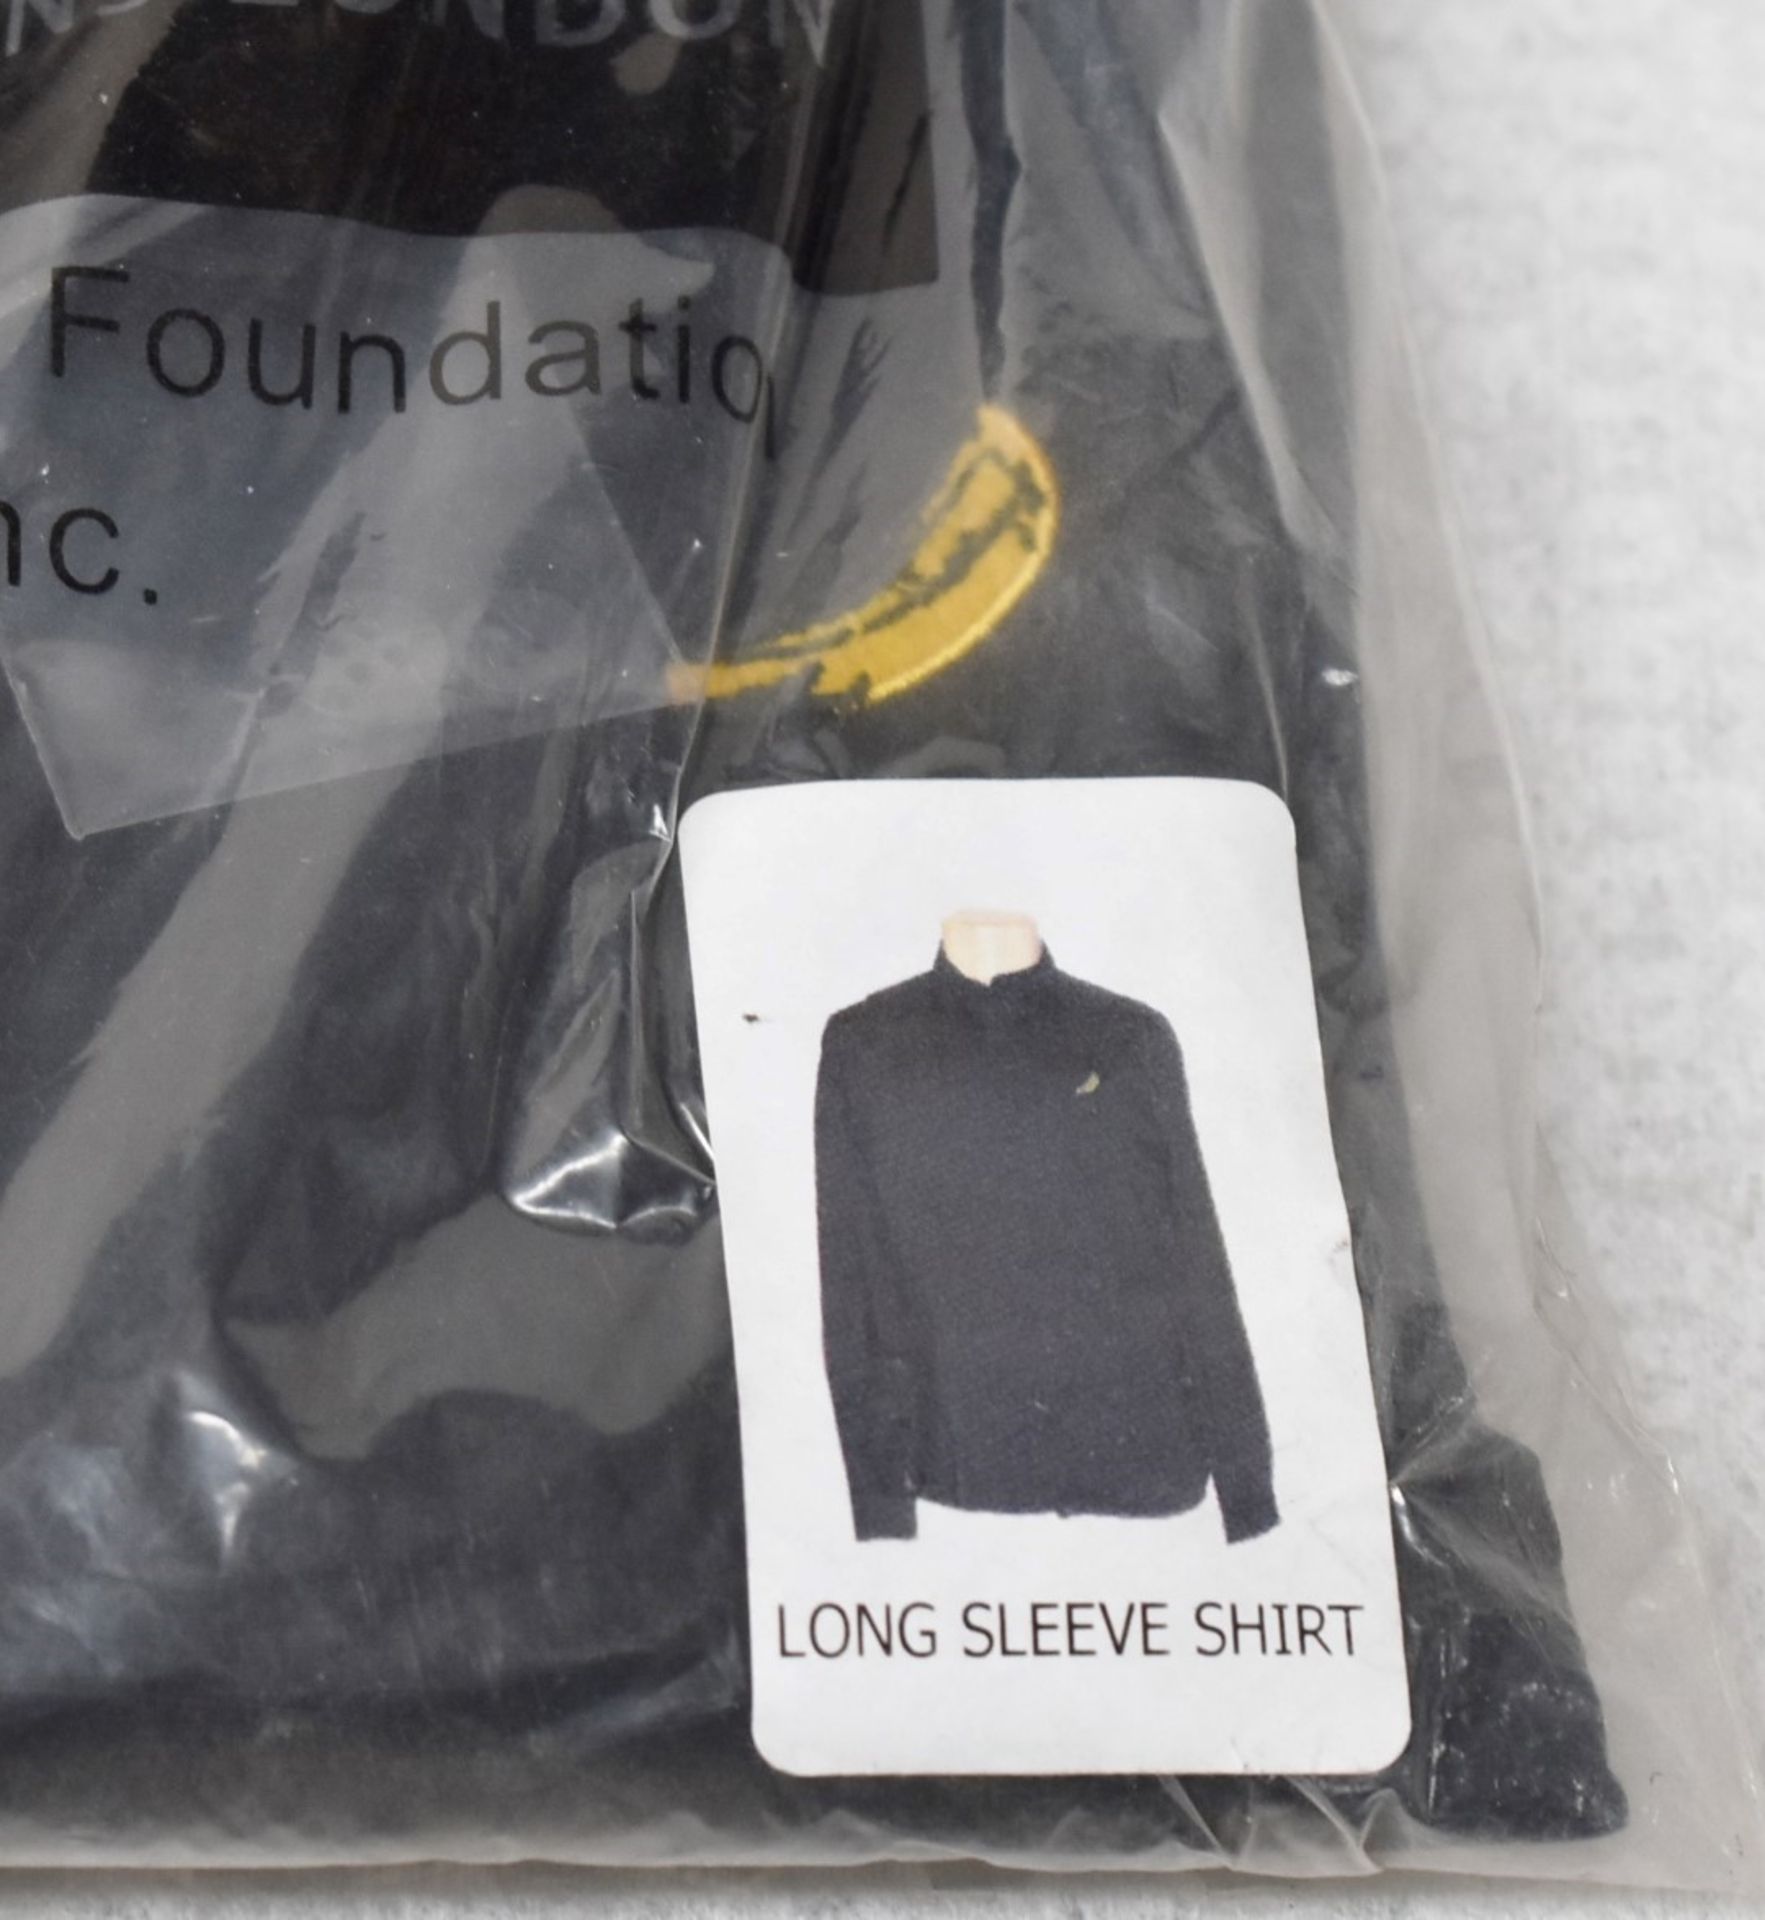 1 x Andy Warhol Velvet Underground Limited Edition Long Sleeve Shirt by Pepe Jeans - Size: Small - - Image 3 of 6